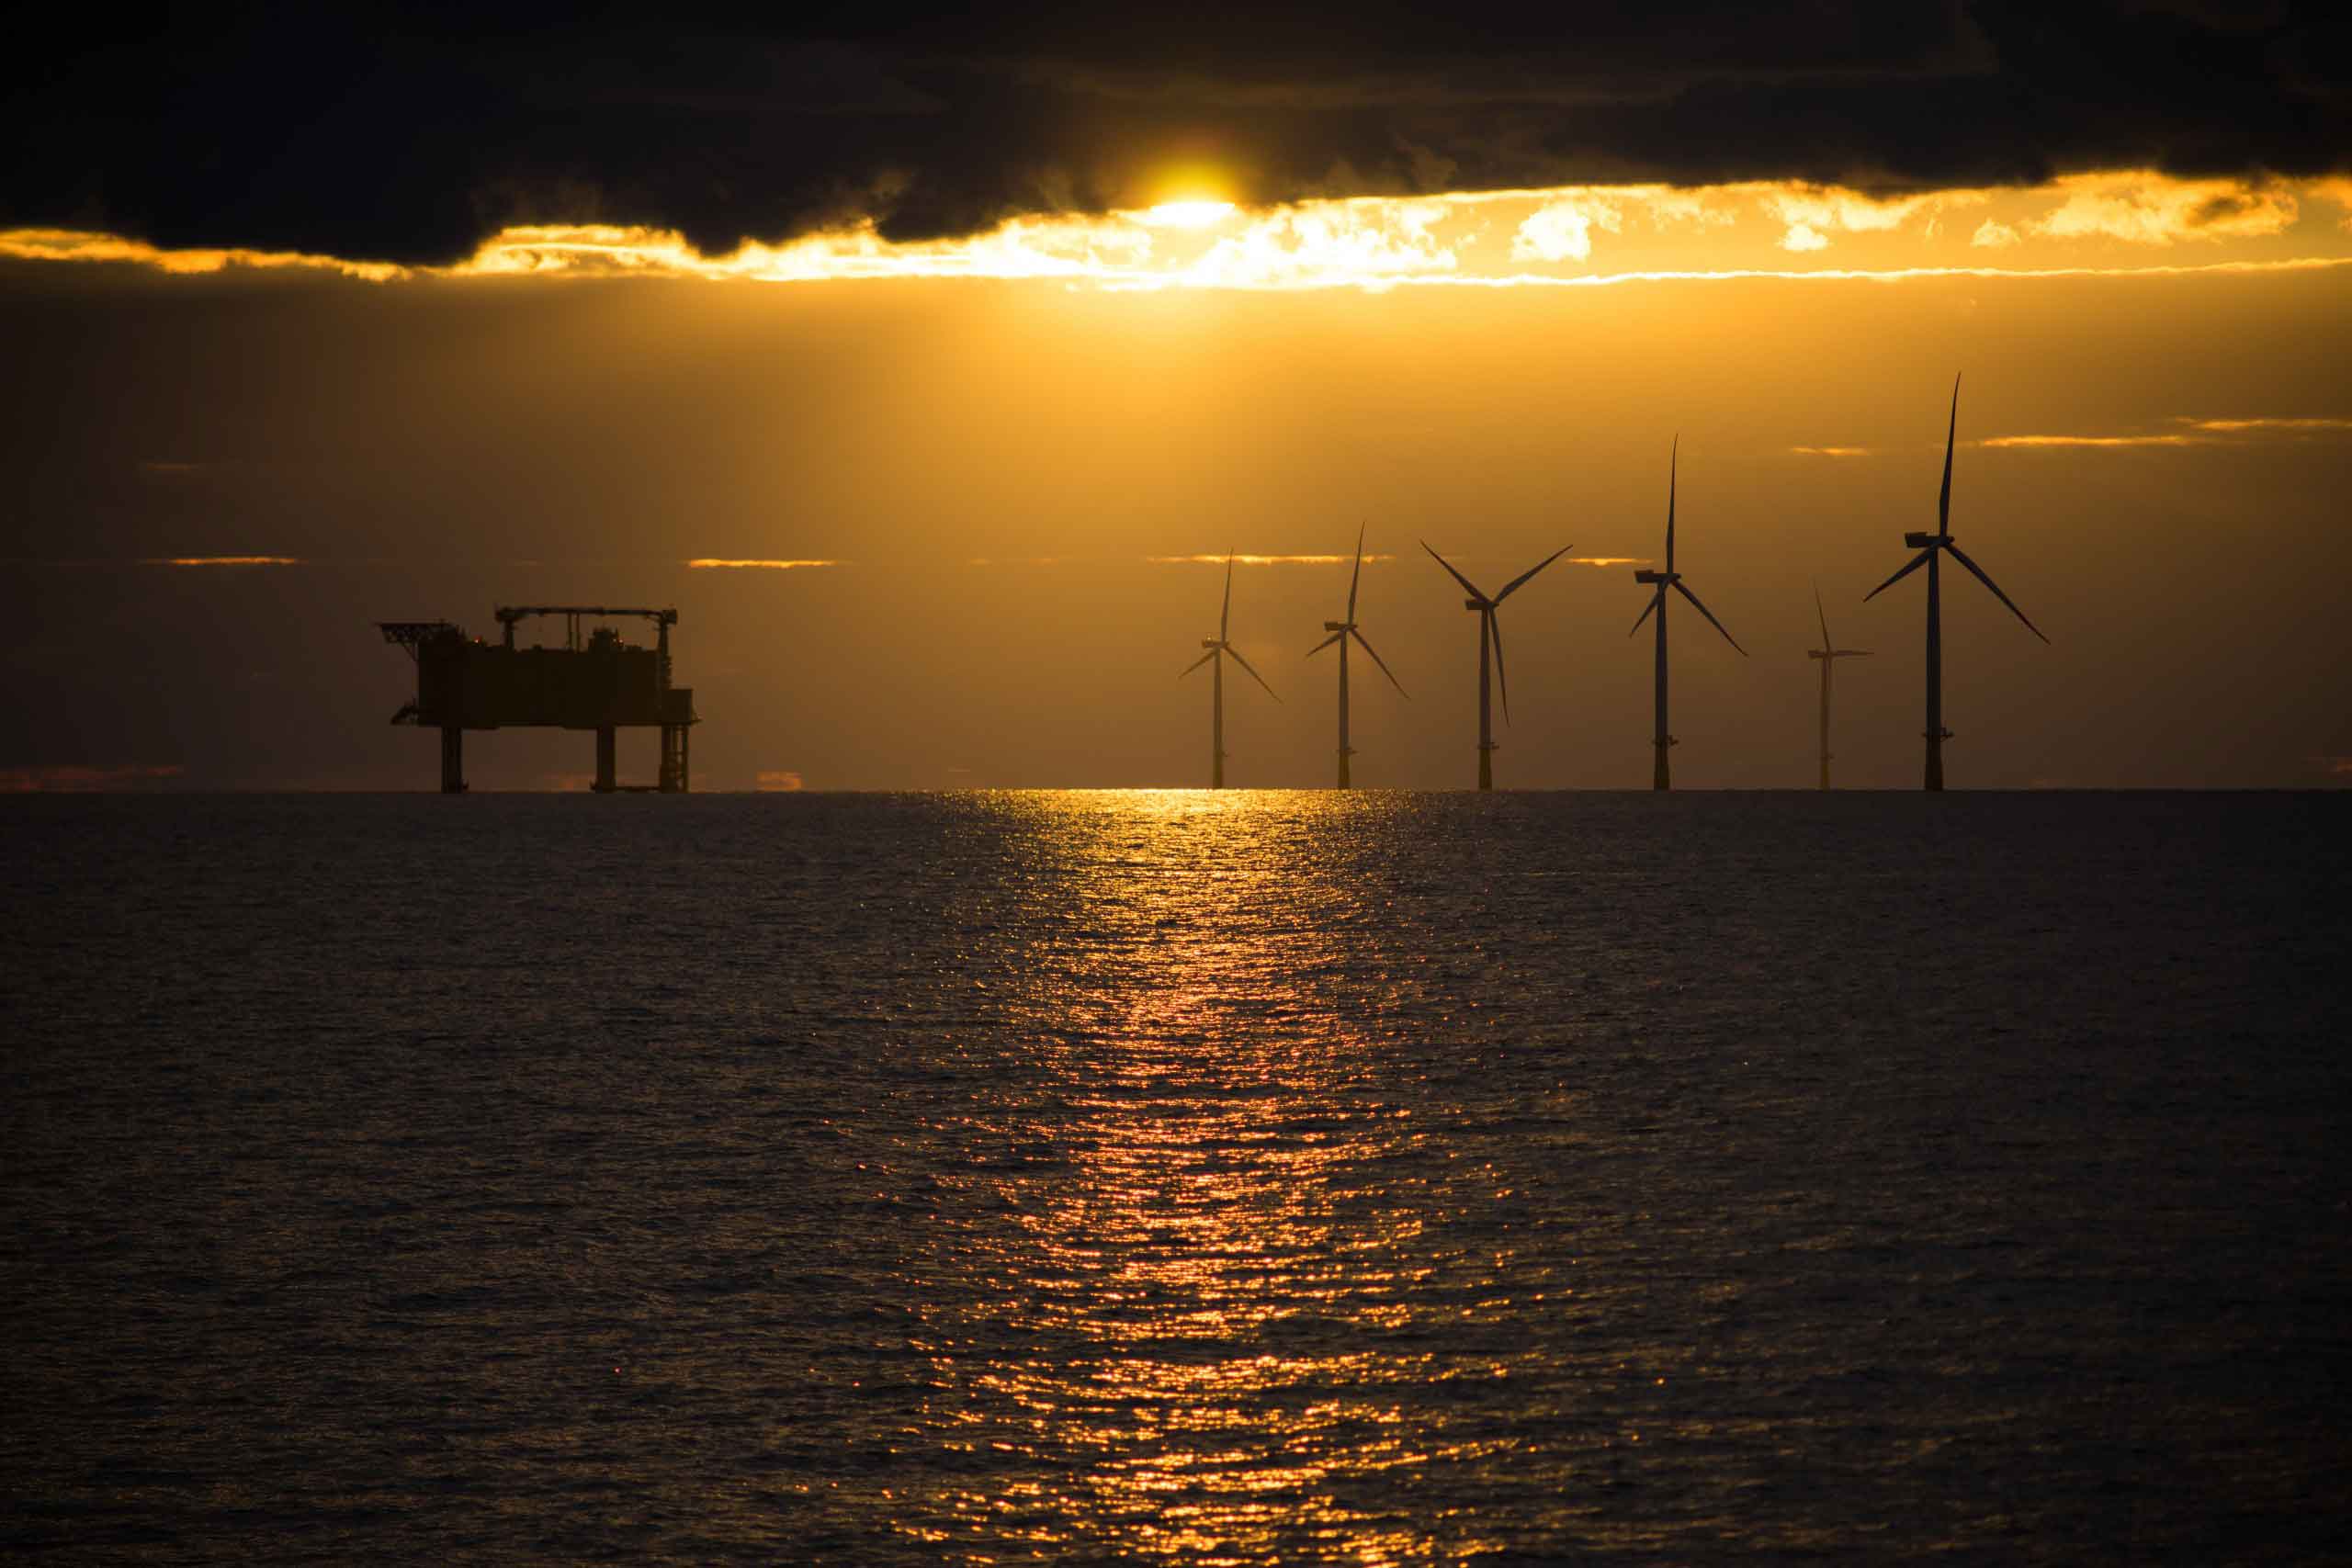 Offshore rig and wind turbines silhouetted against the sunset